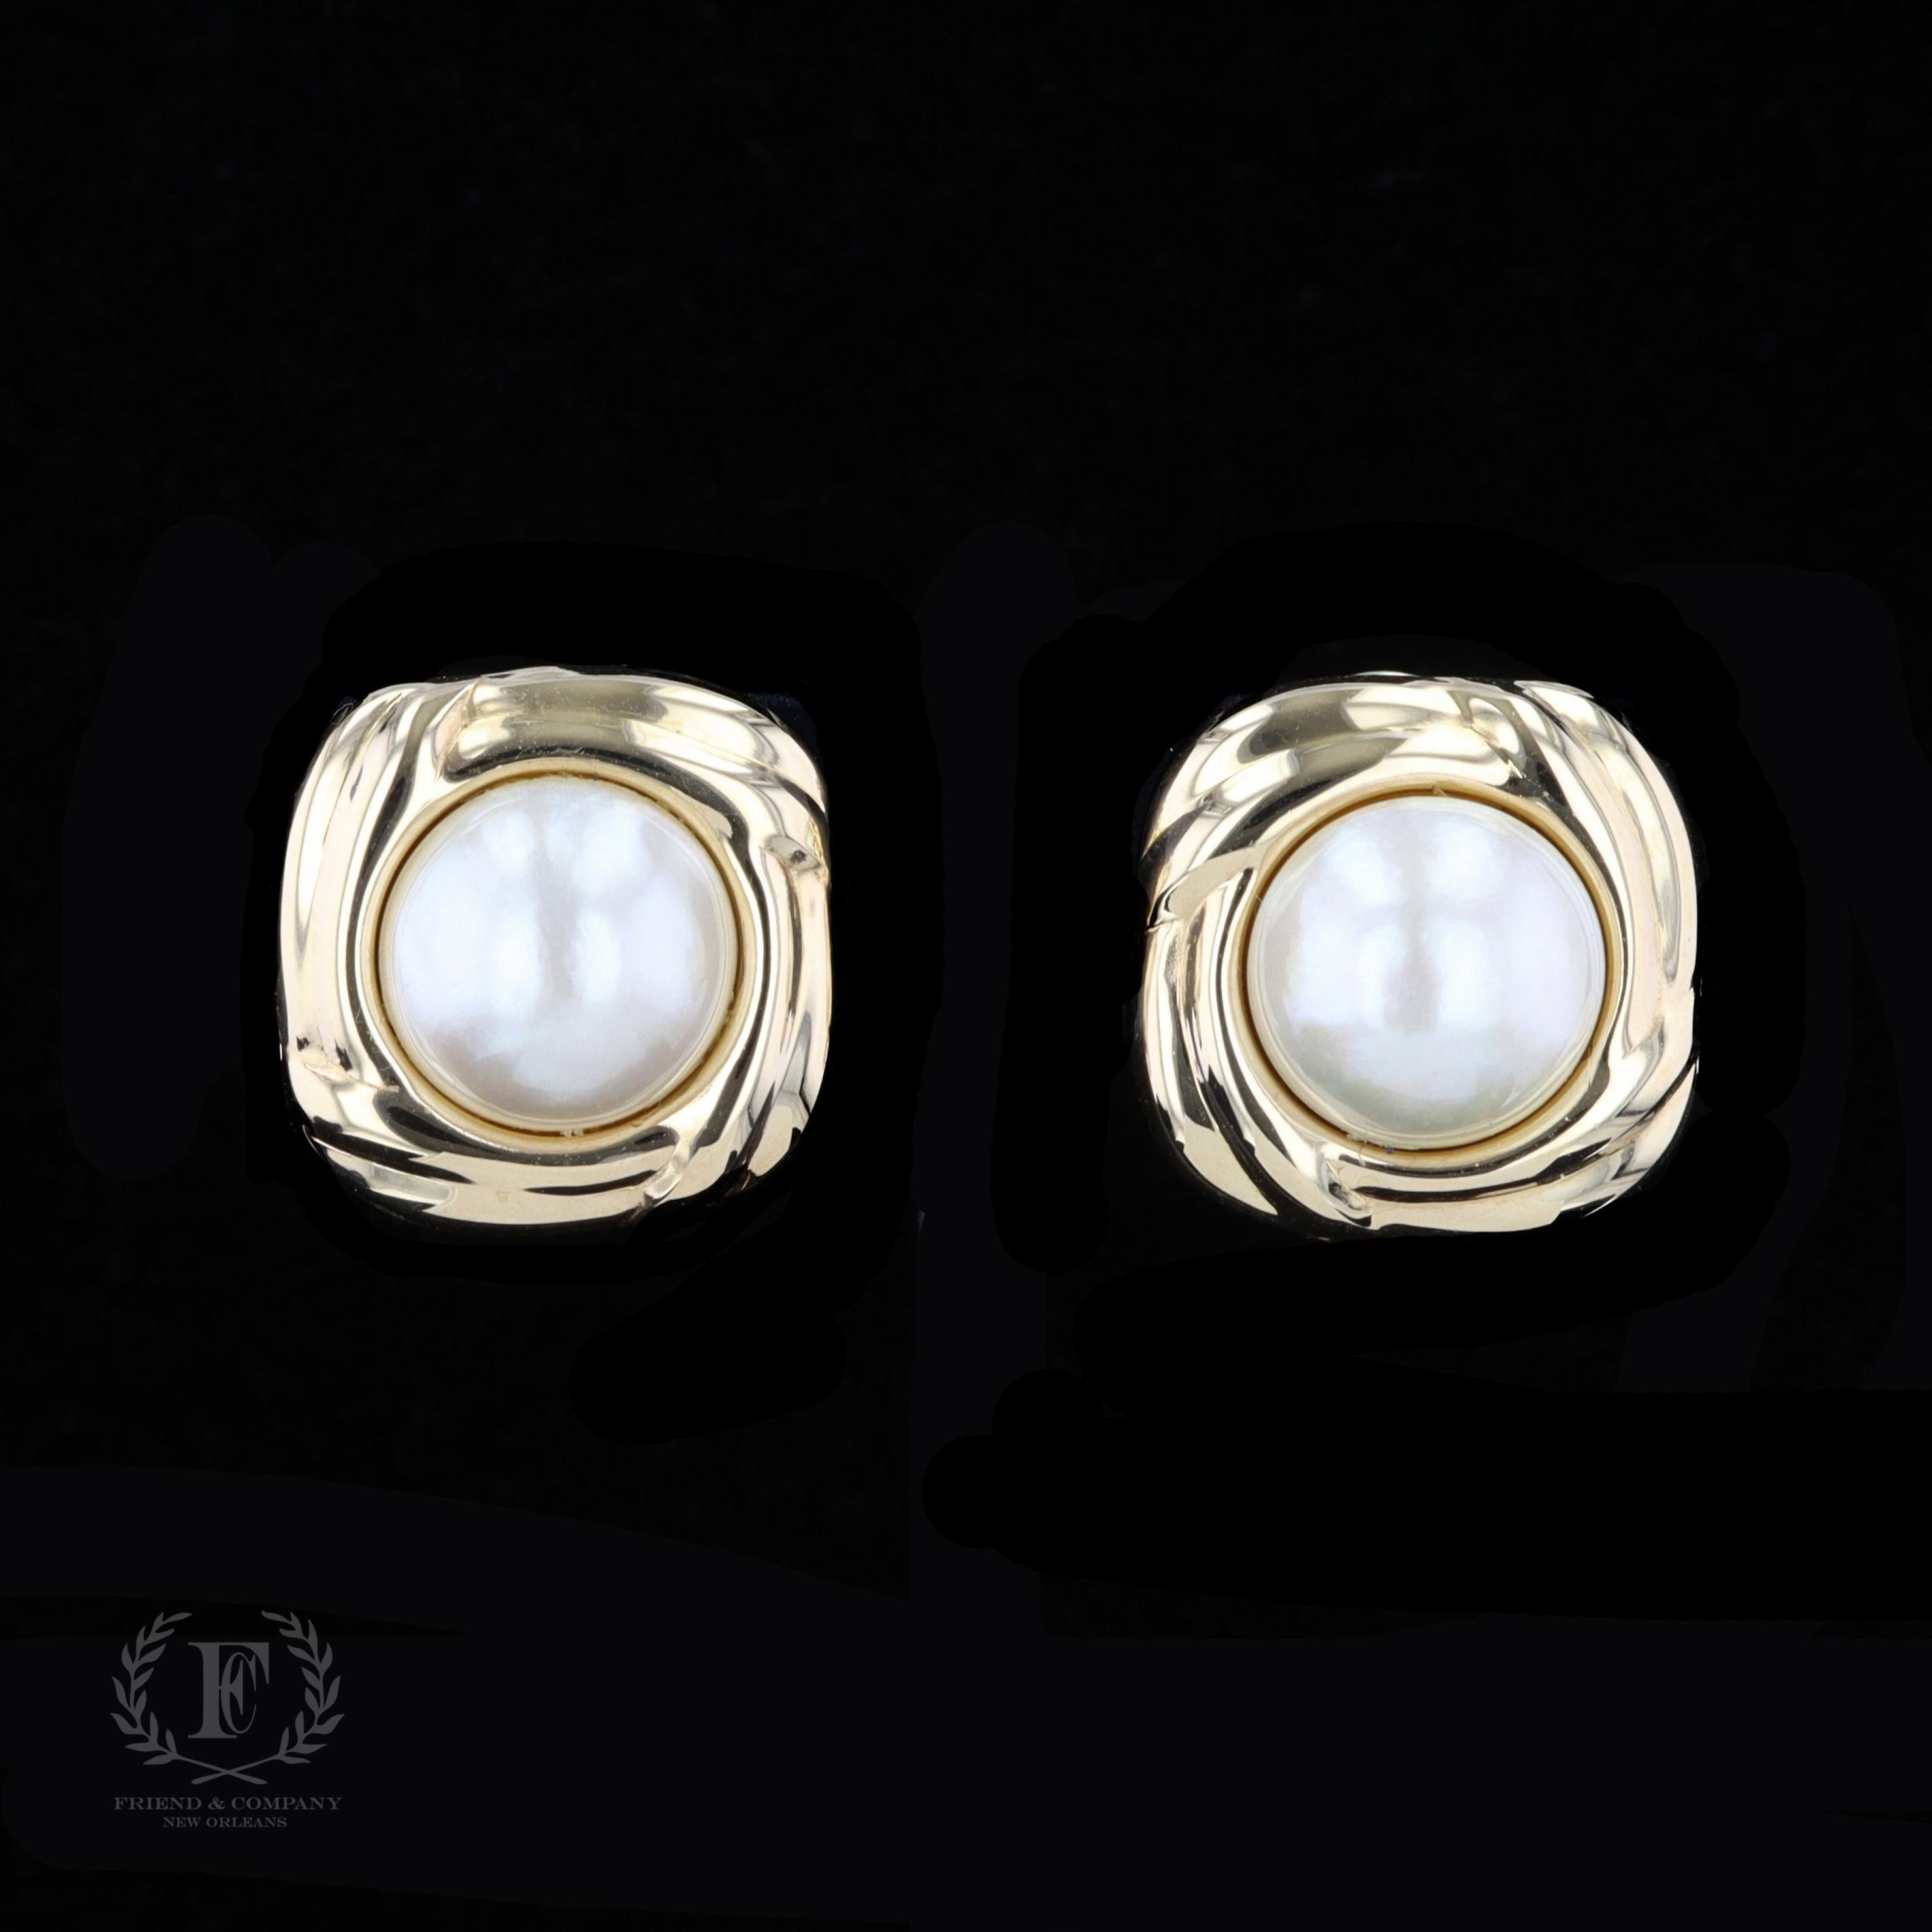 An elegant and timeless pair of earrings to add to your collection. This beautiful pair of 14 karat yellow gold earrings feature two round Mabe pearls measuring 13-14 millimeters each. The earrings are finished with clip-on backs.